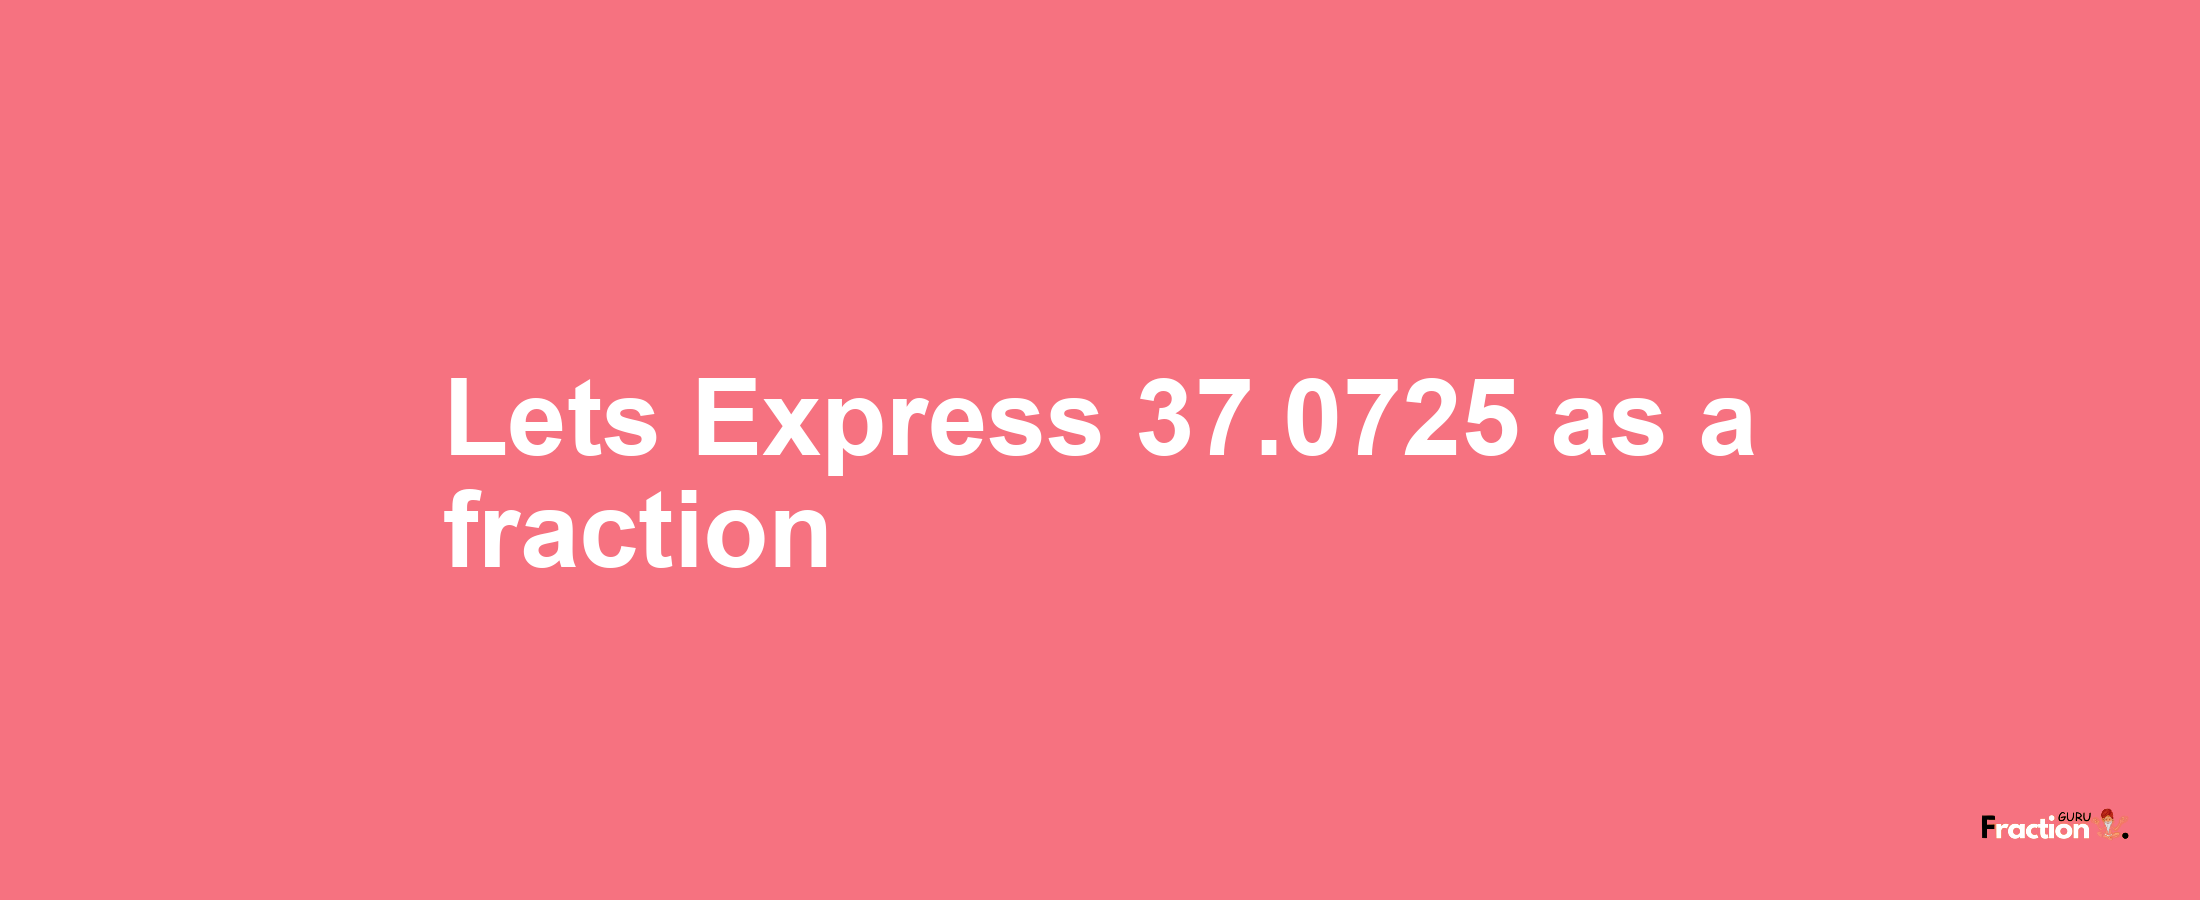 Lets Express 37.0725 as afraction